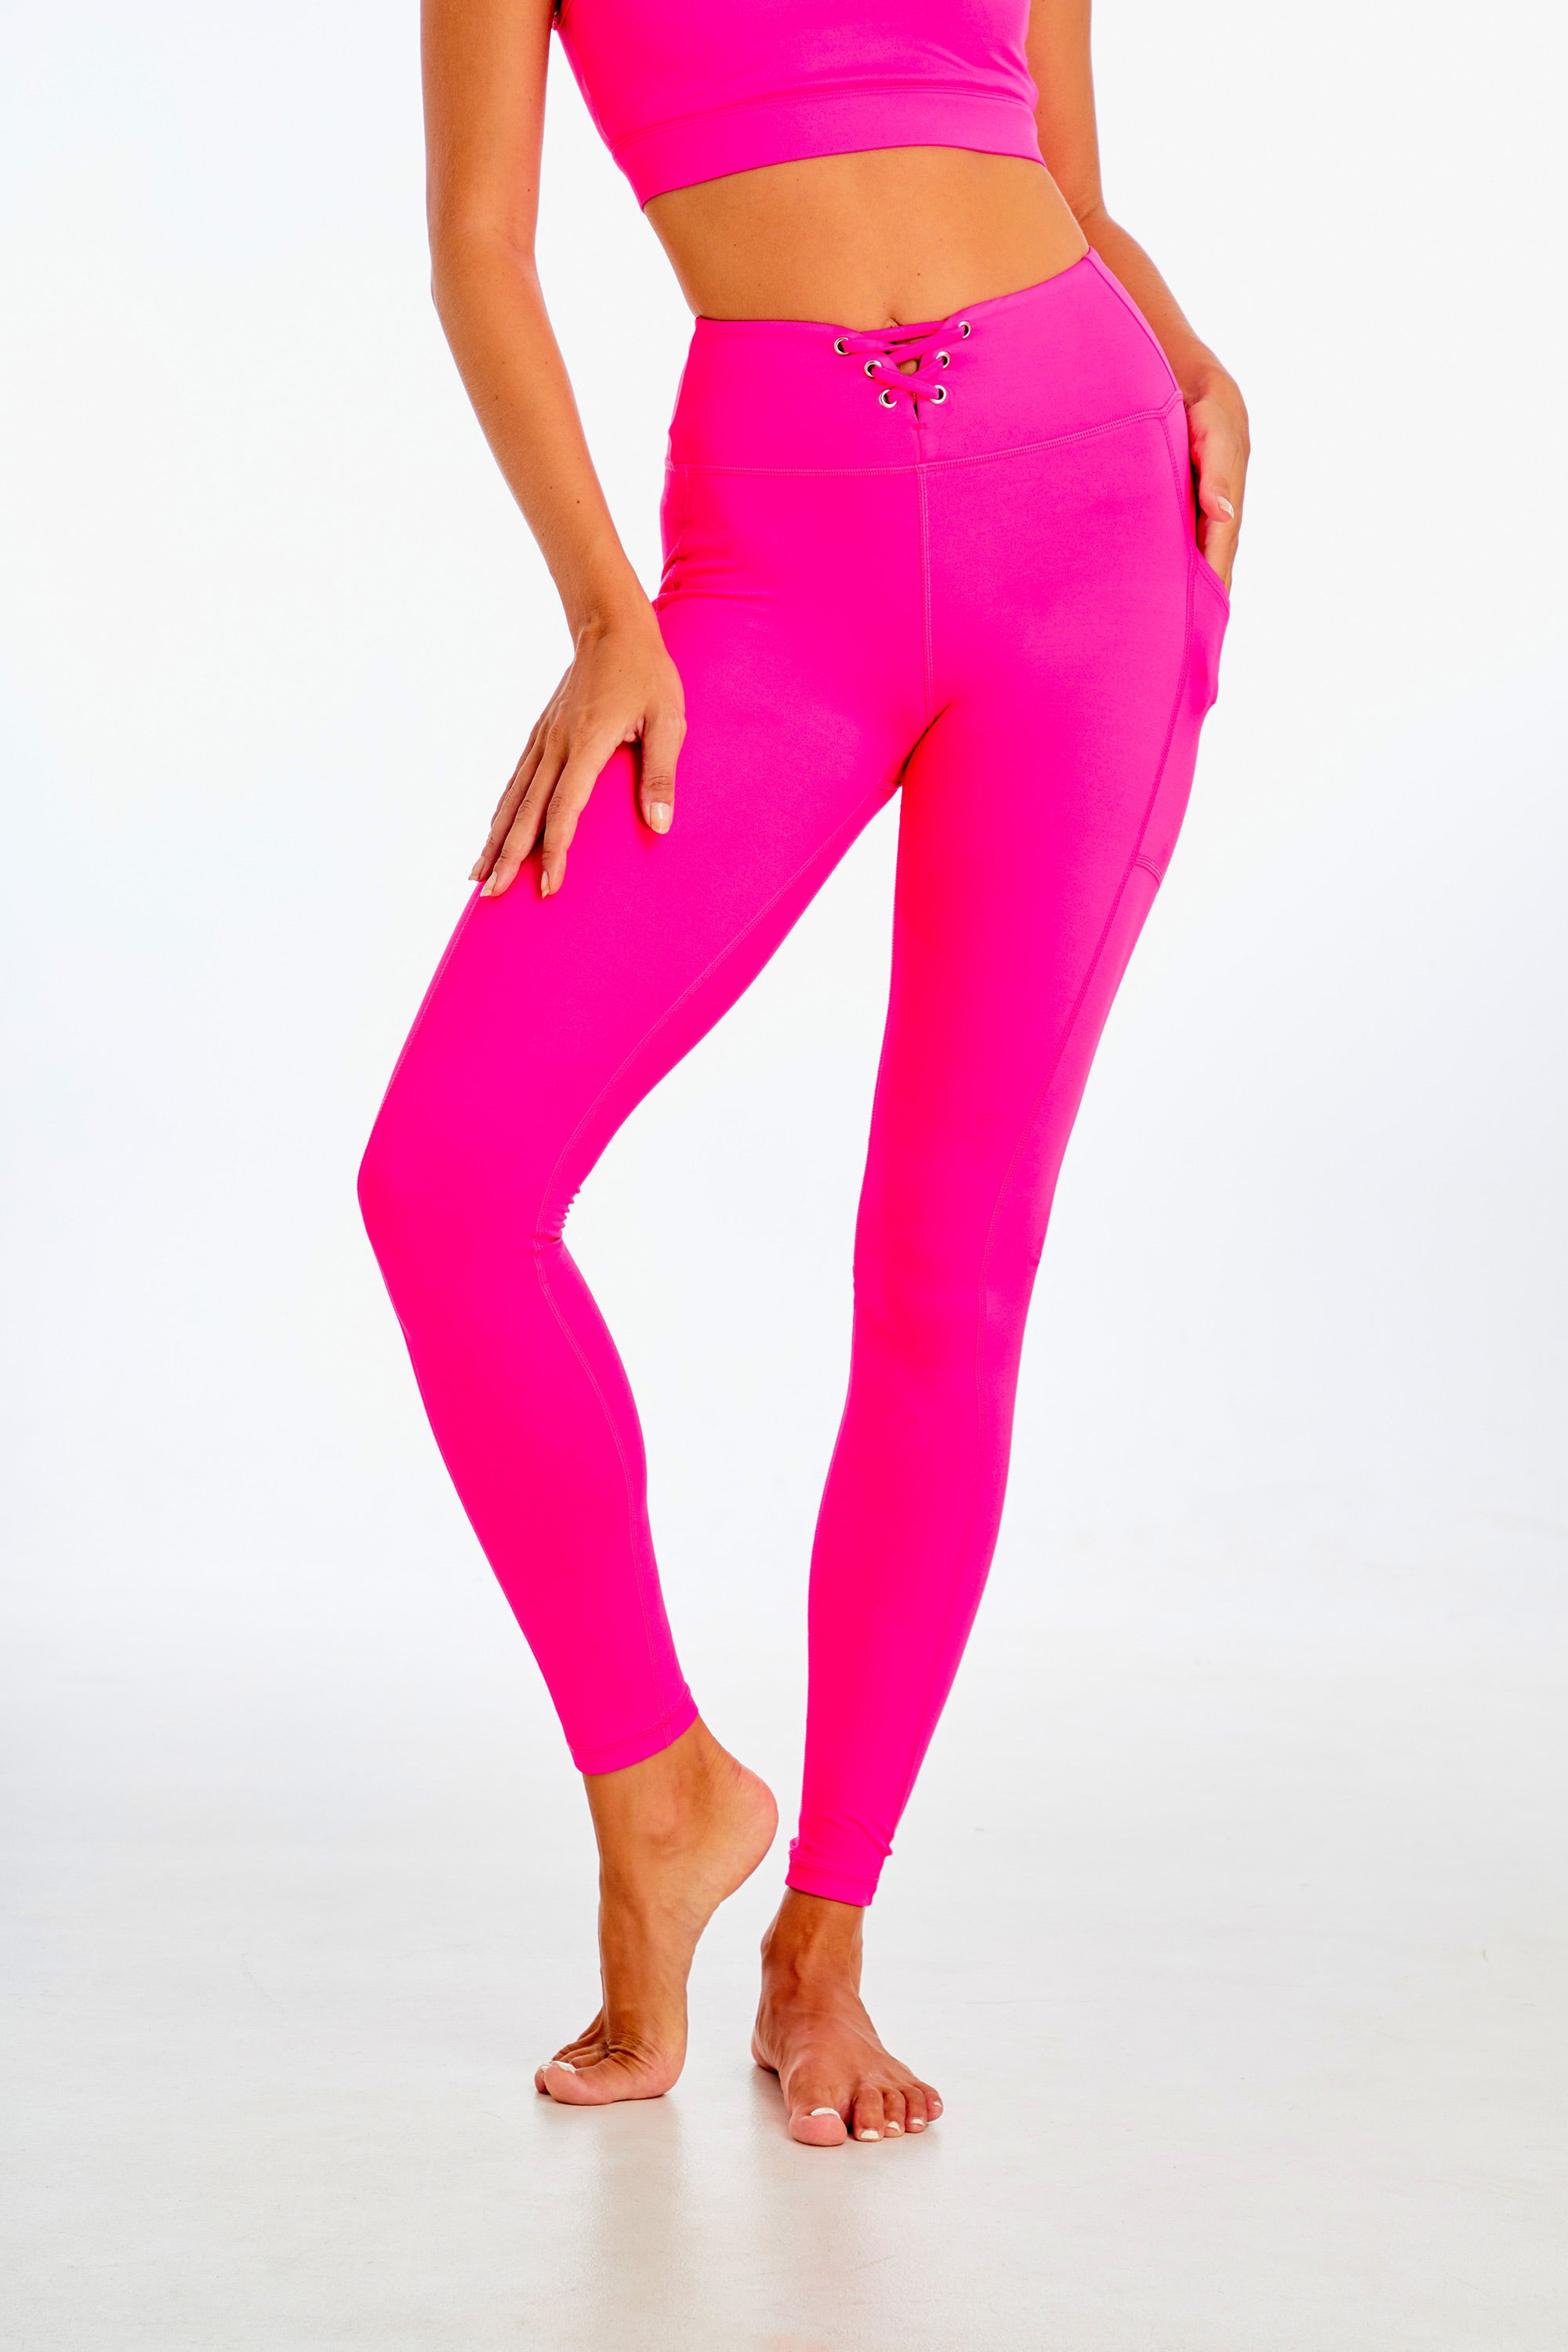 Women's Neon Leggings Training Tights with High Waist Stretchy